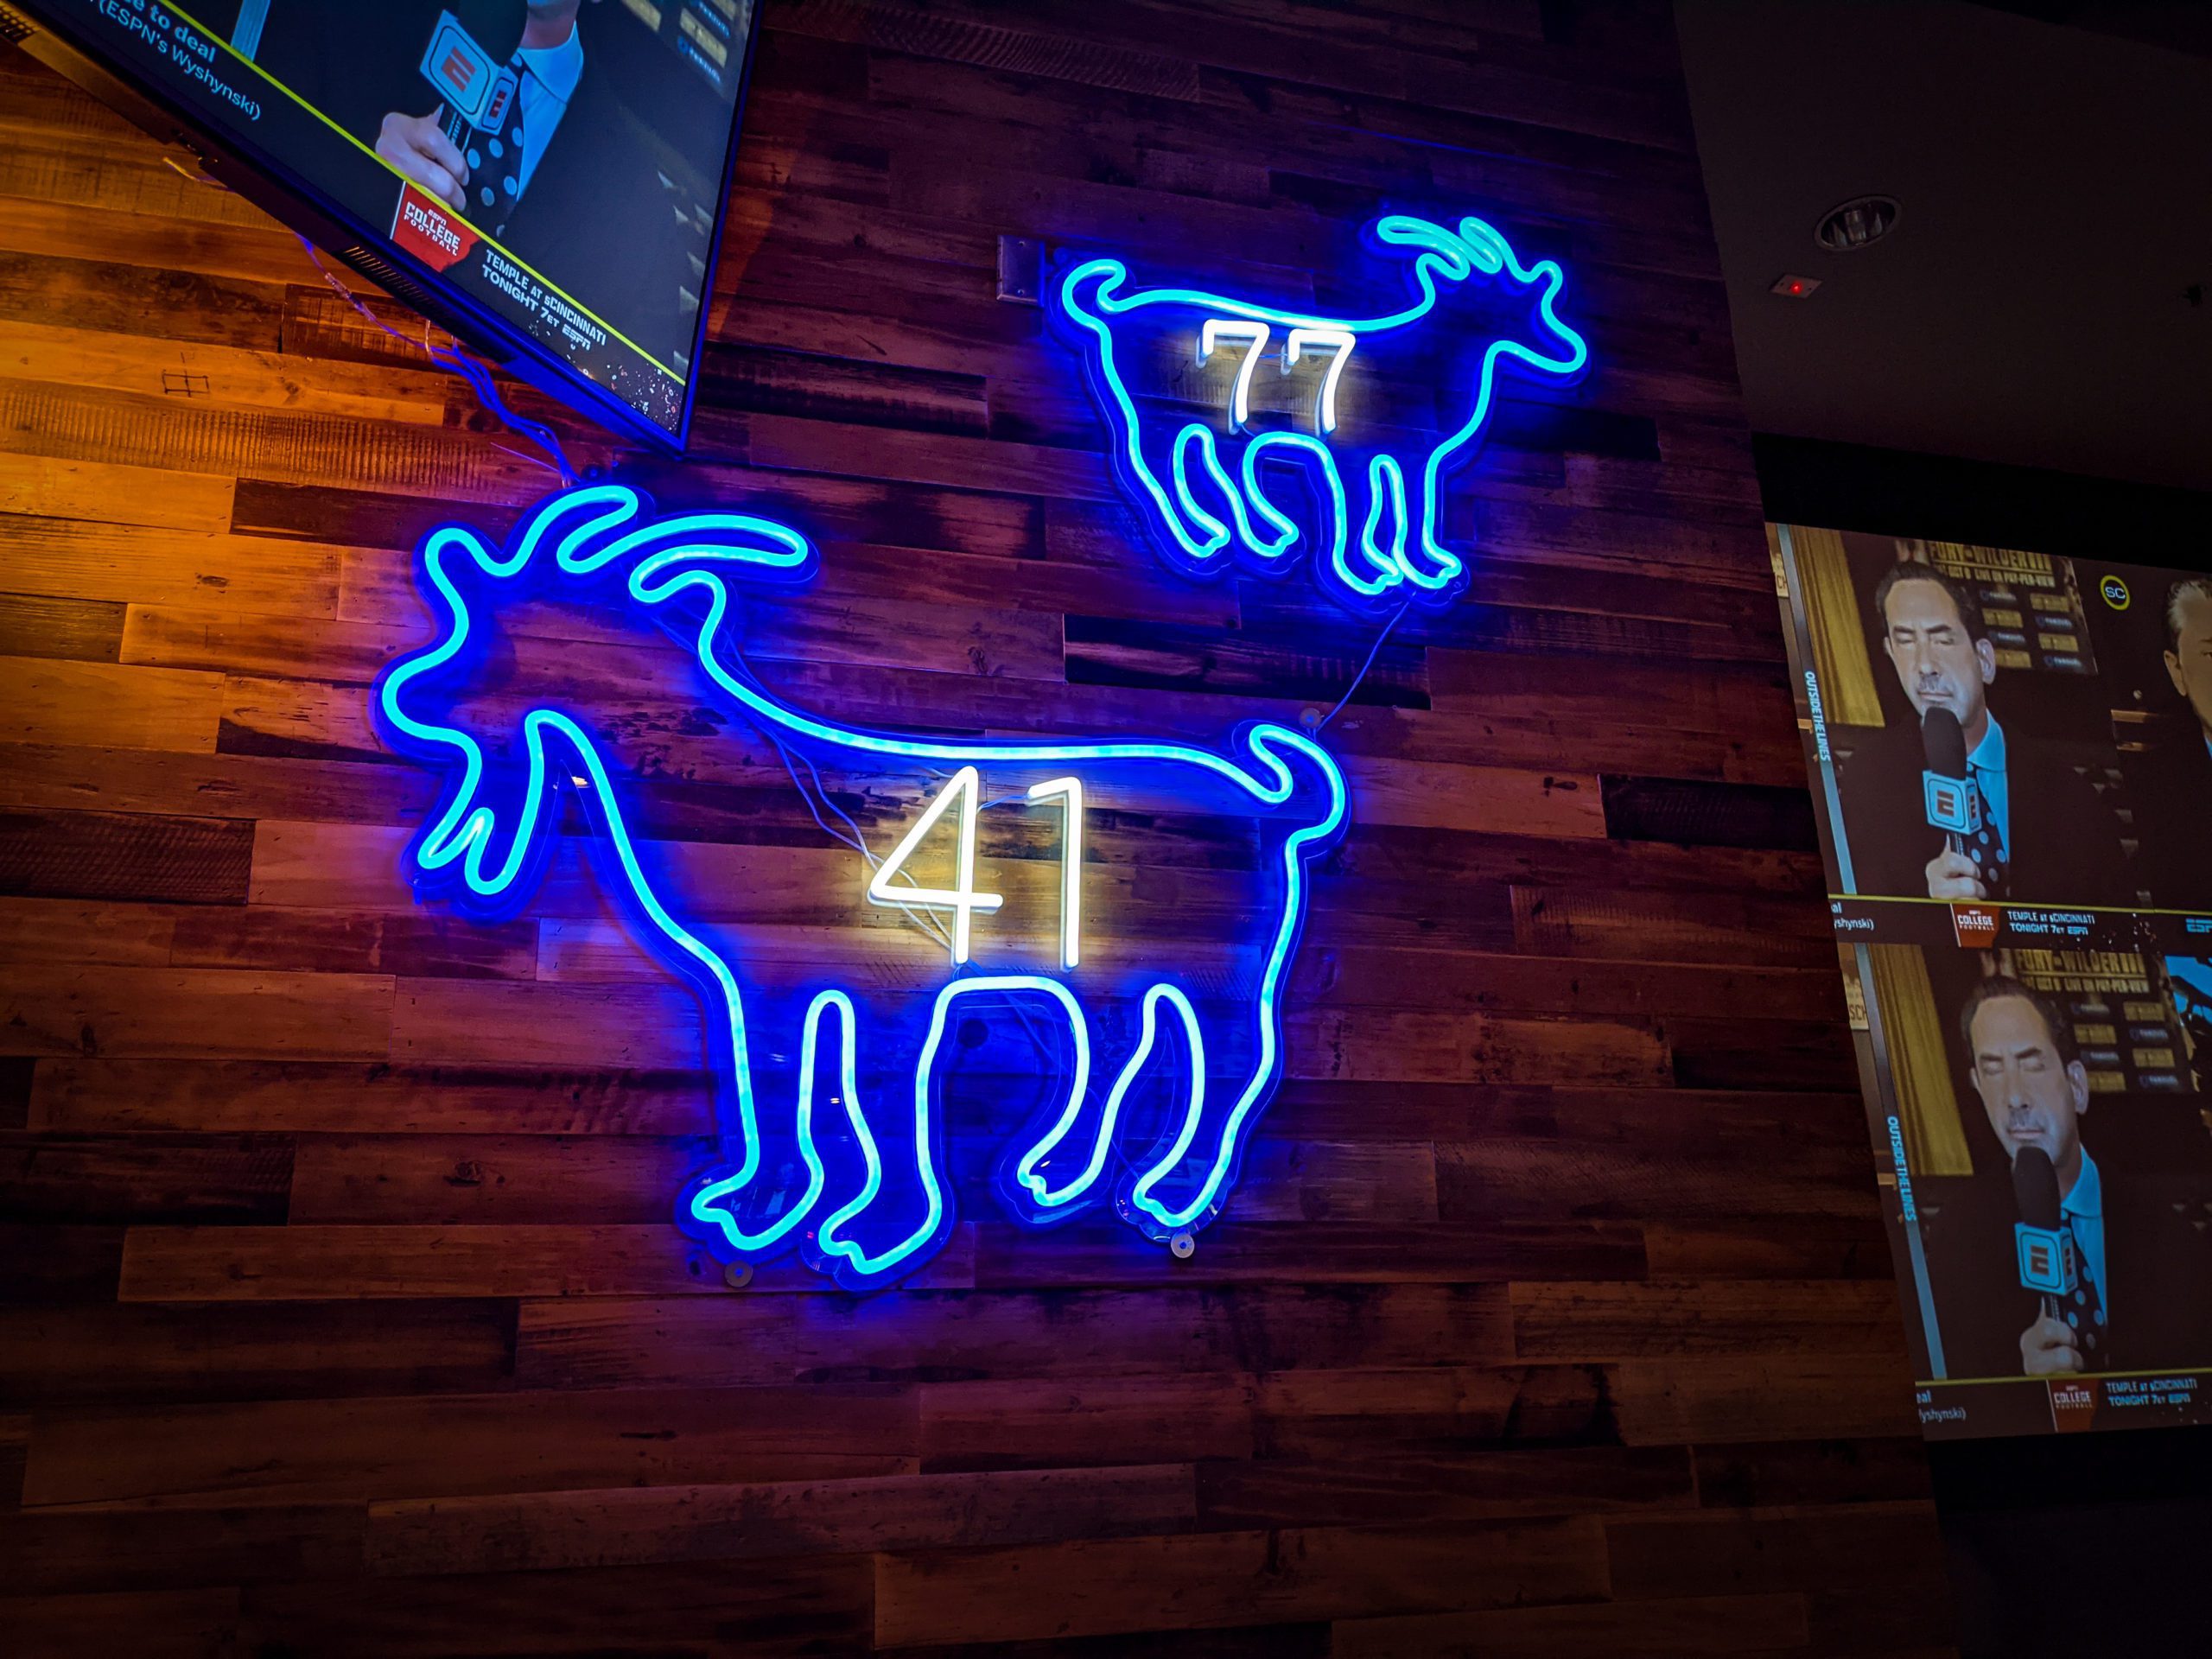 light up goats with Dirk and Lua's numbers